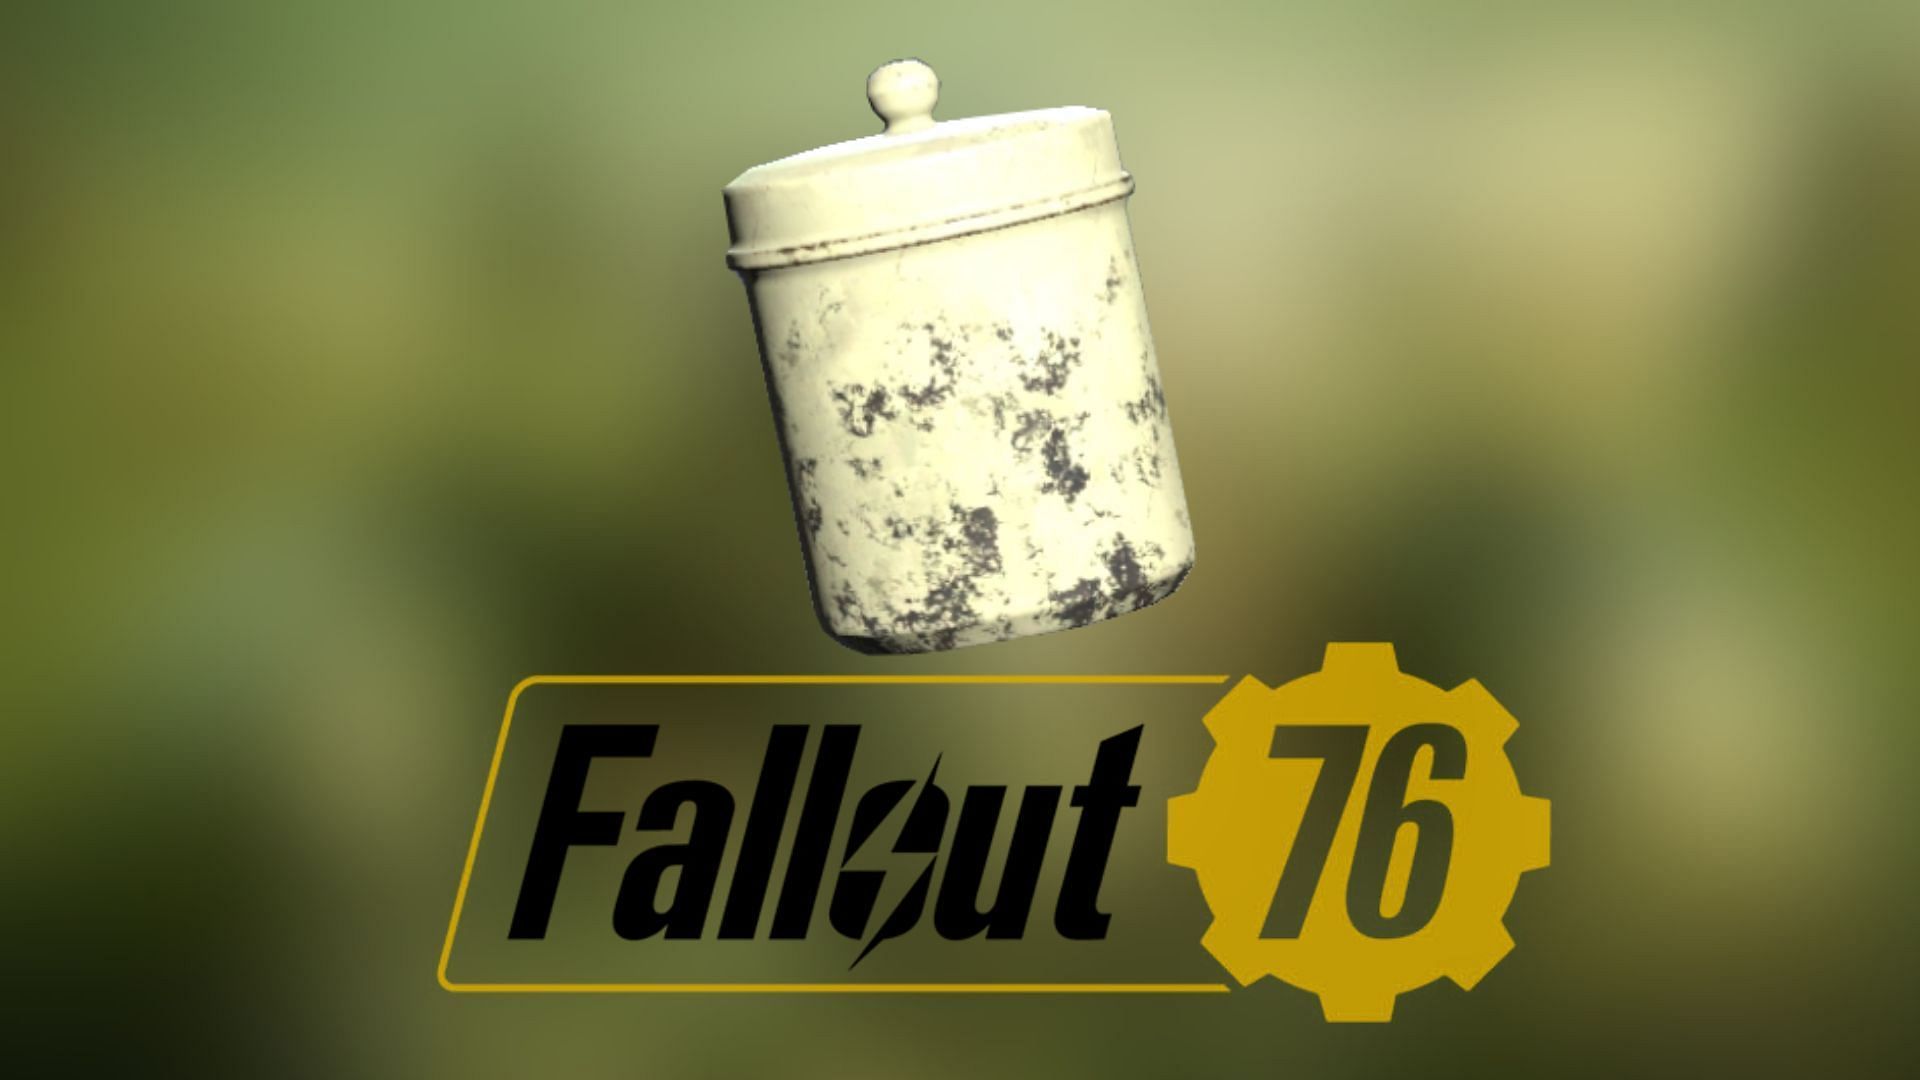 locations to find sugar in Fallout 76